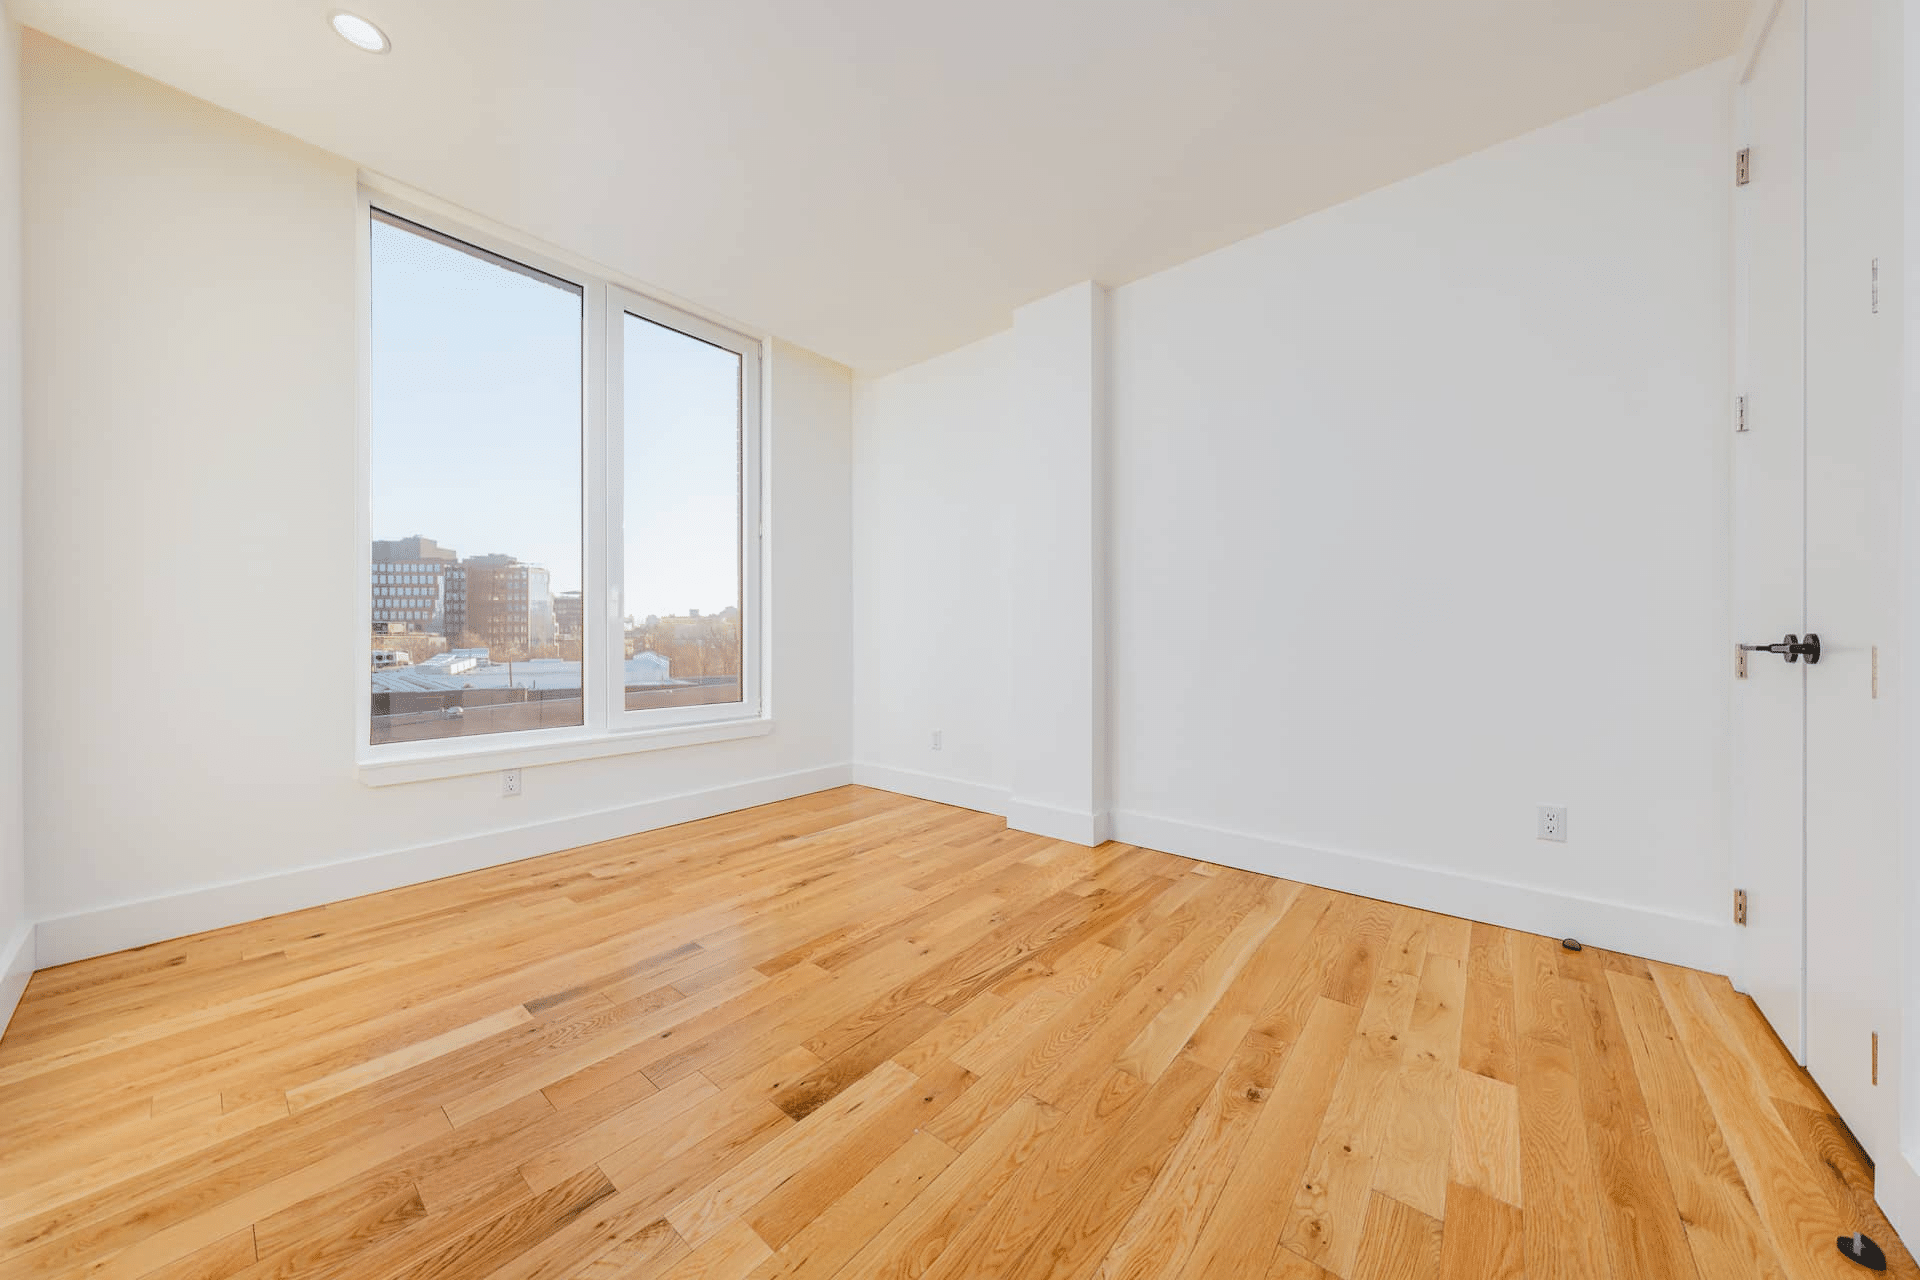 room with wood floor, white walls and recessed lighting